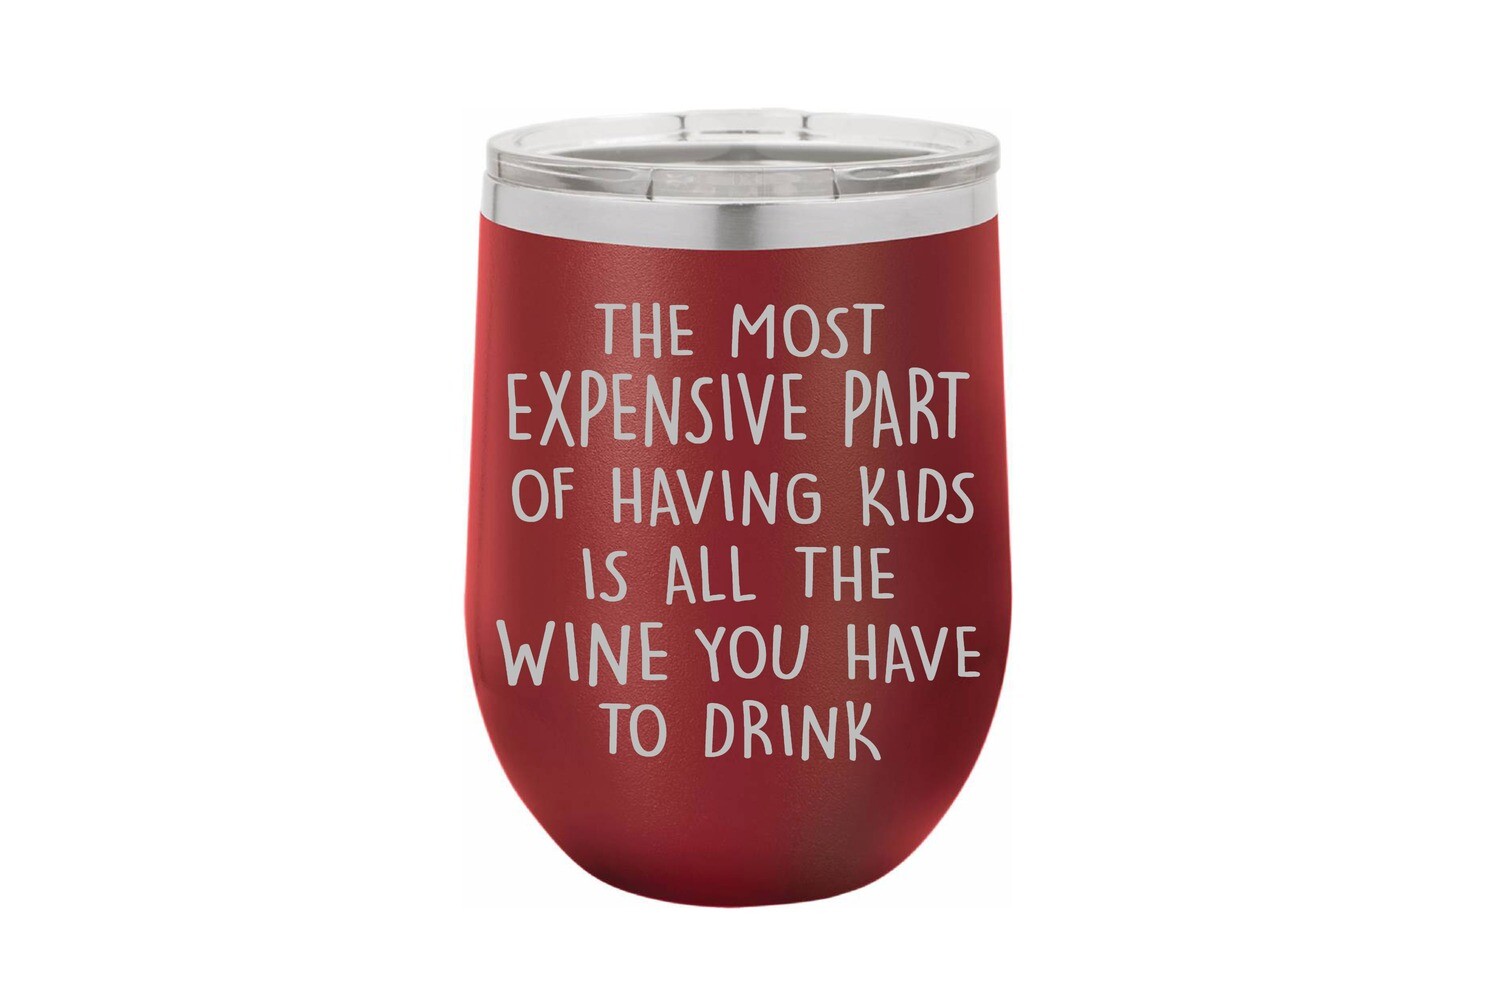 The most expensive part of having kids is all the wine you have to drink Insulated Tumbler 12 oz